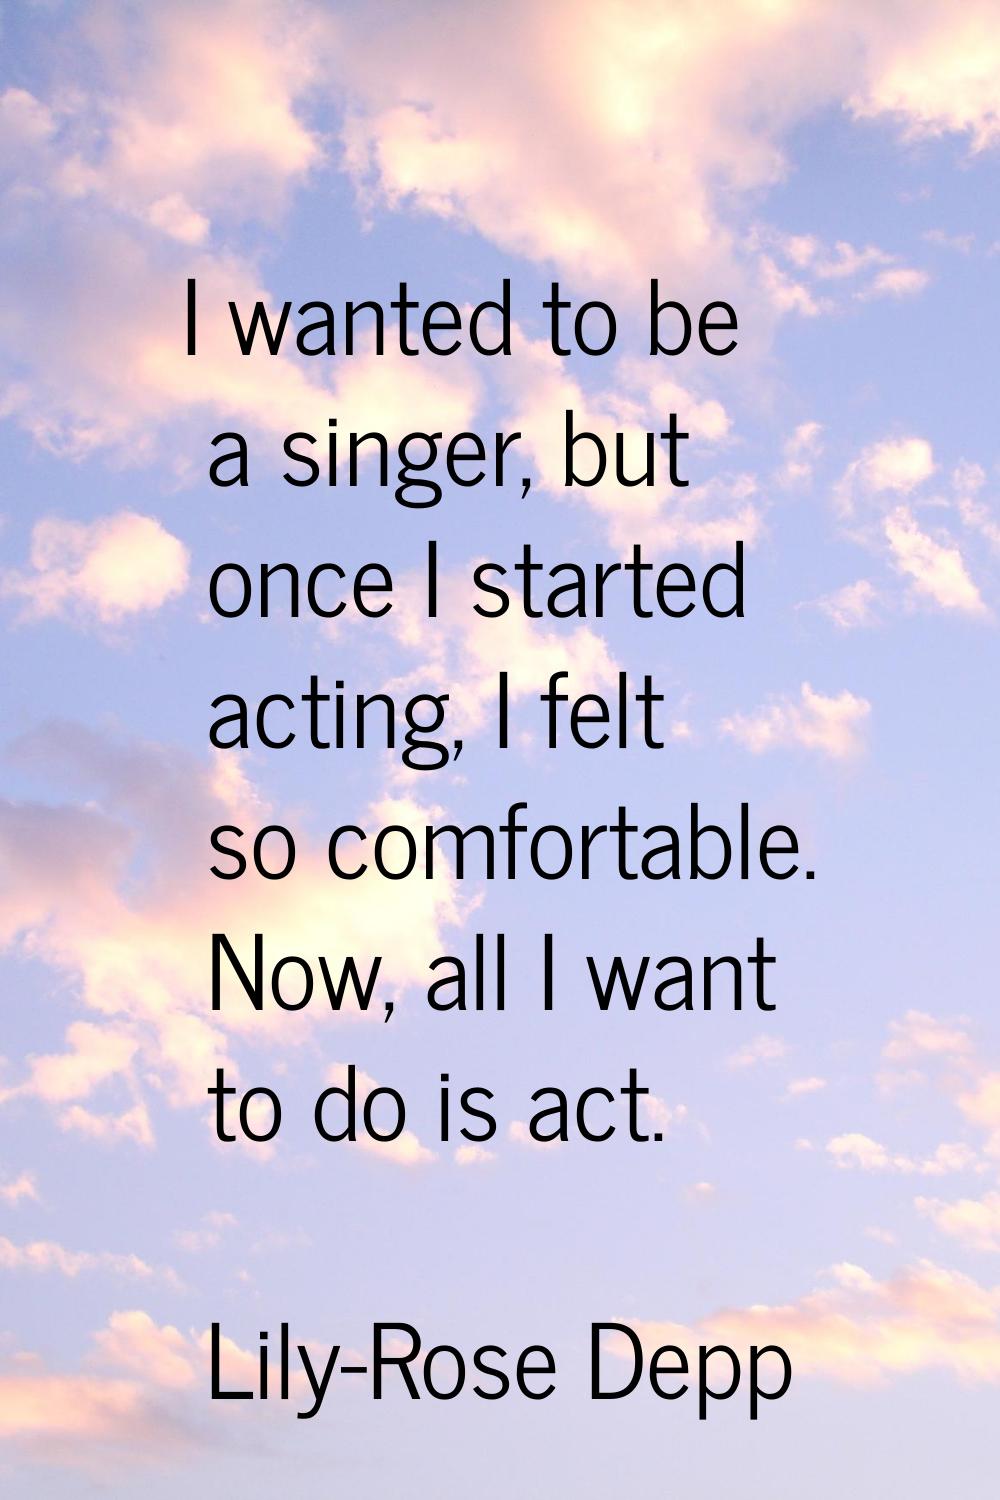 I wanted to be a singer, but once I started acting, I felt so comfortable. Now, all I want to do is